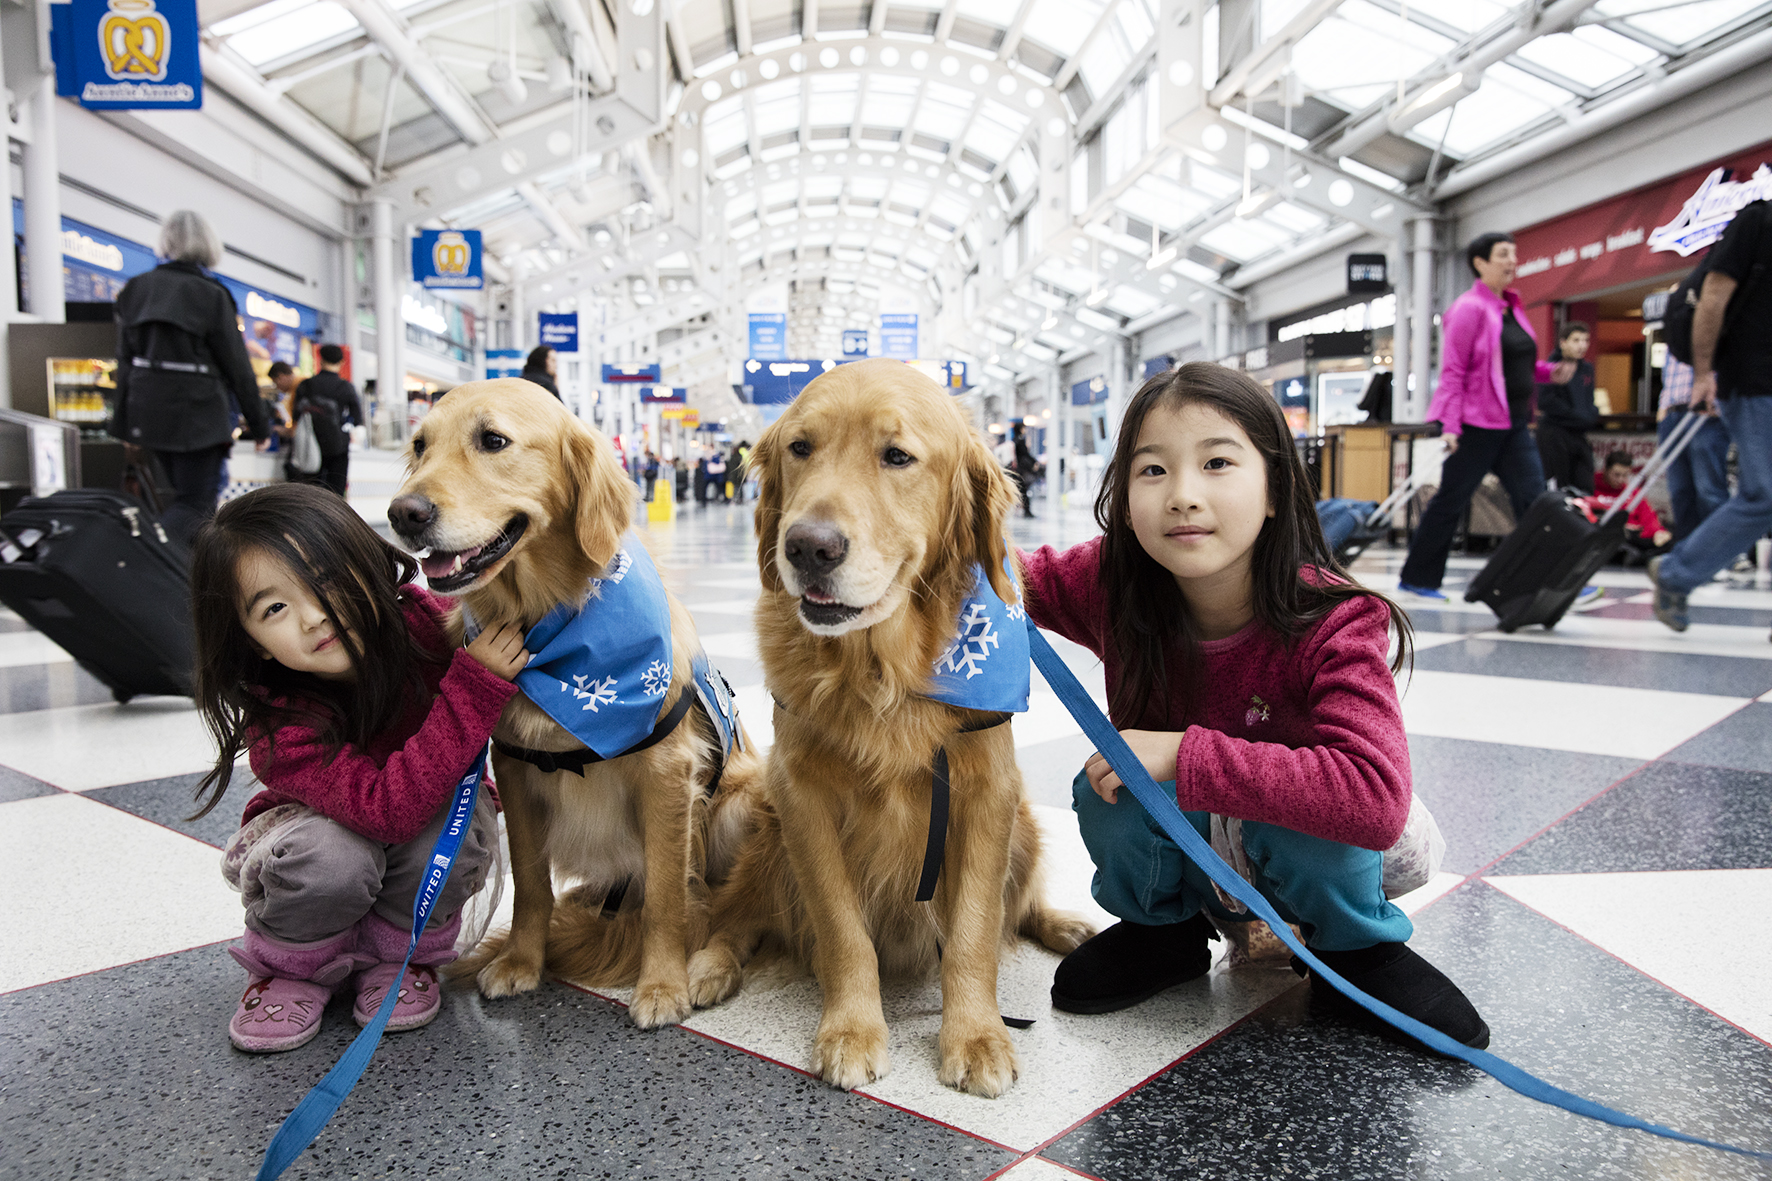 Pet Therapy in the form of dogs to pat to relieve travel stress as part of the United Paws program